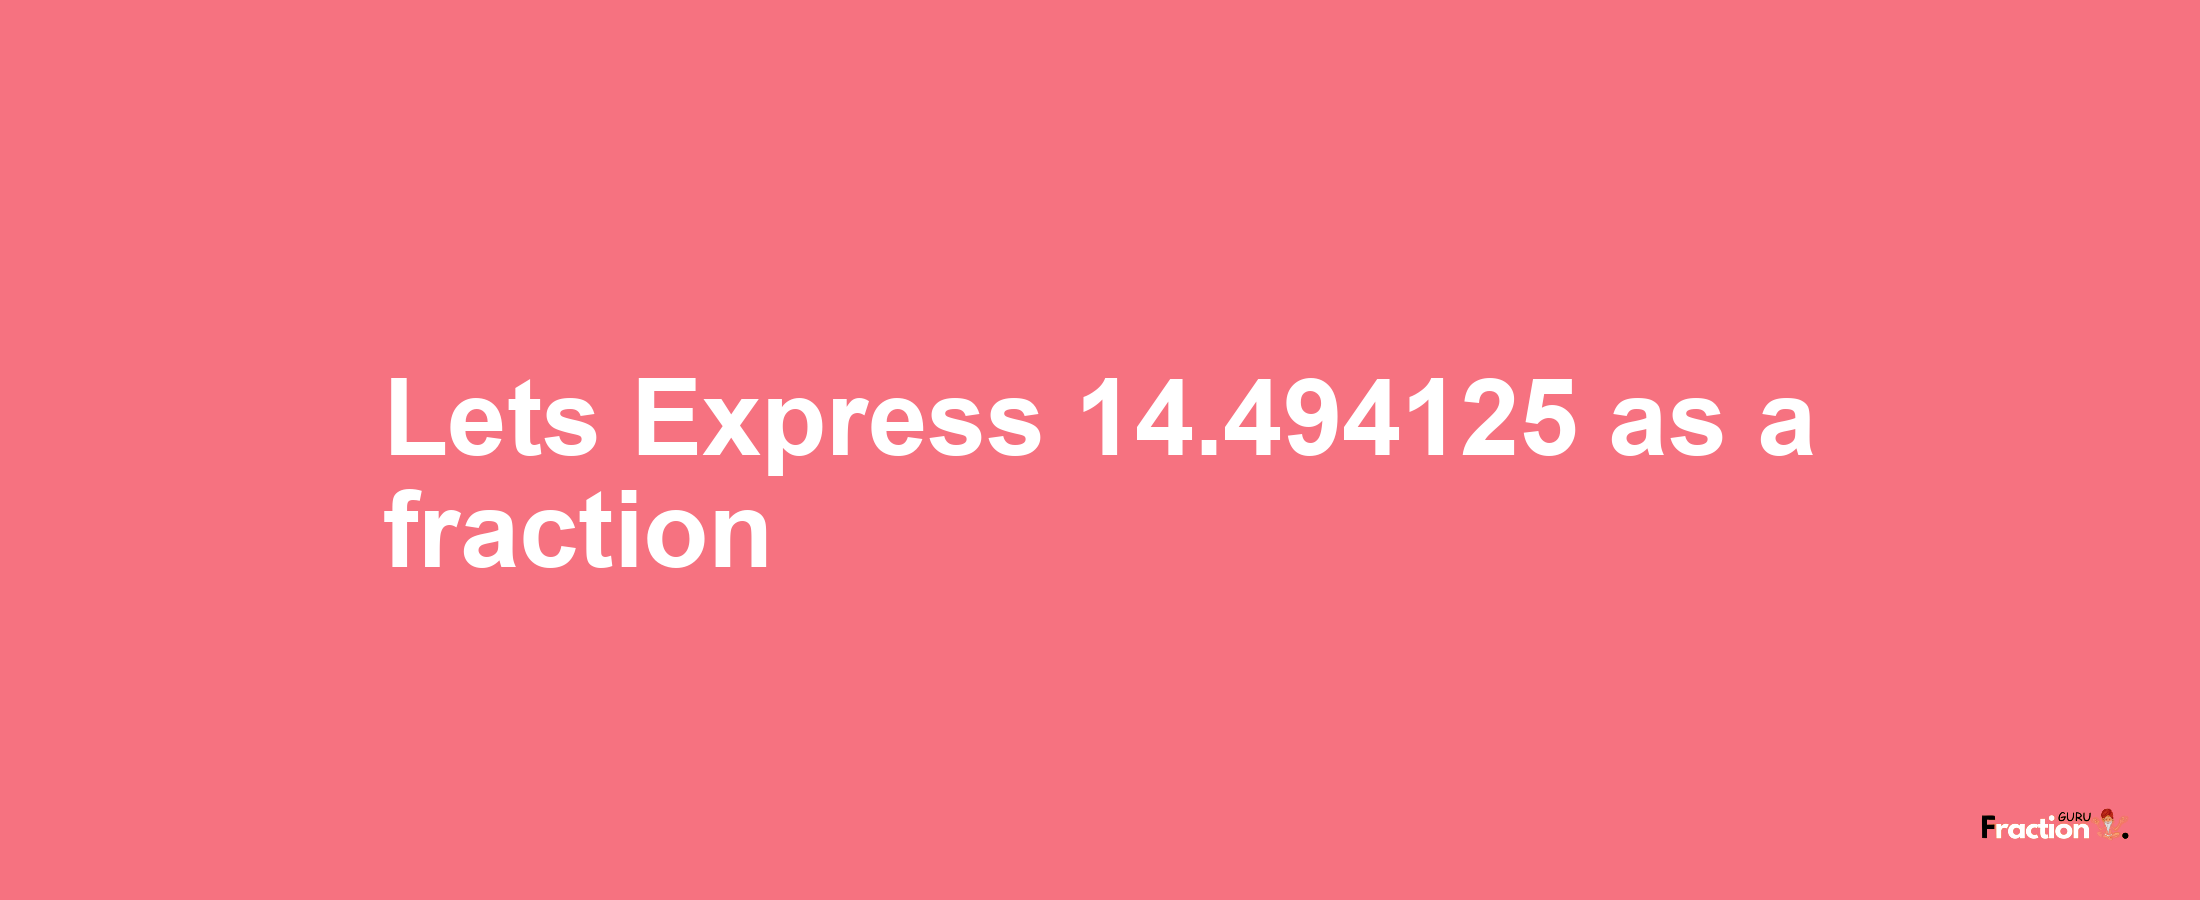 Lets Express 14.494125 as afraction